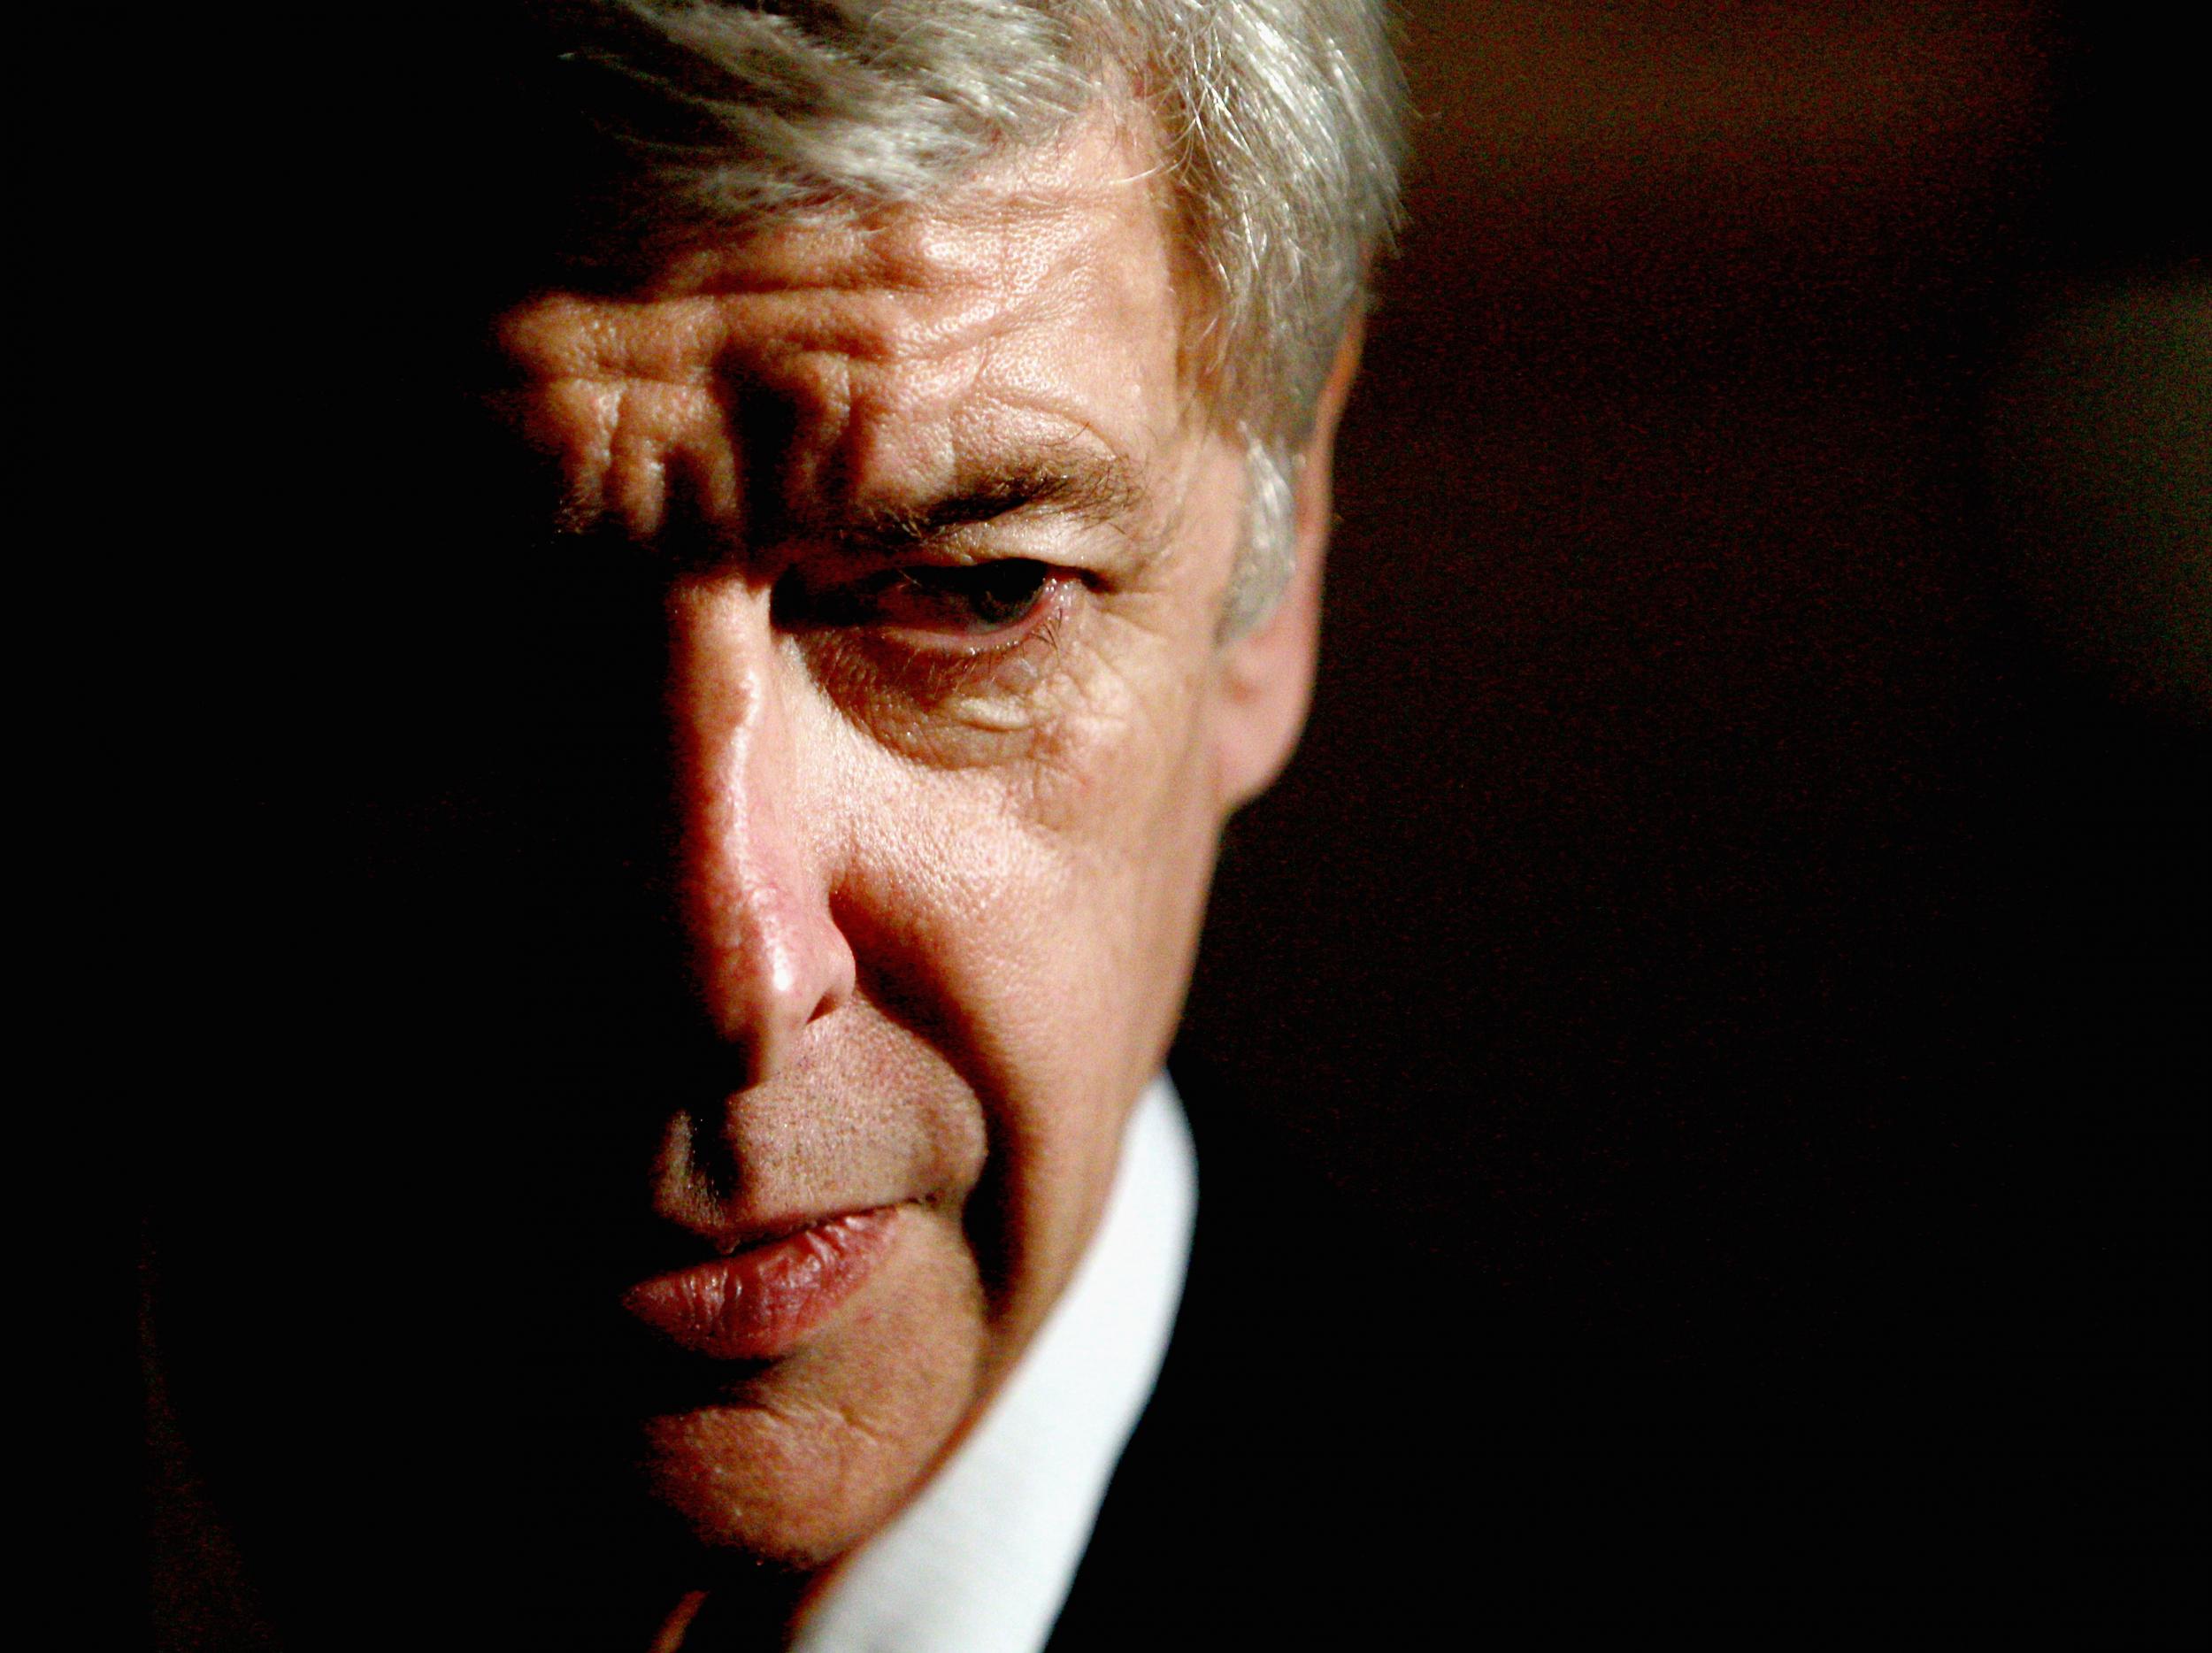 Arsene Wenger leads Arsenal into the Europa League group stage for the first time in his two-decade reign at the club